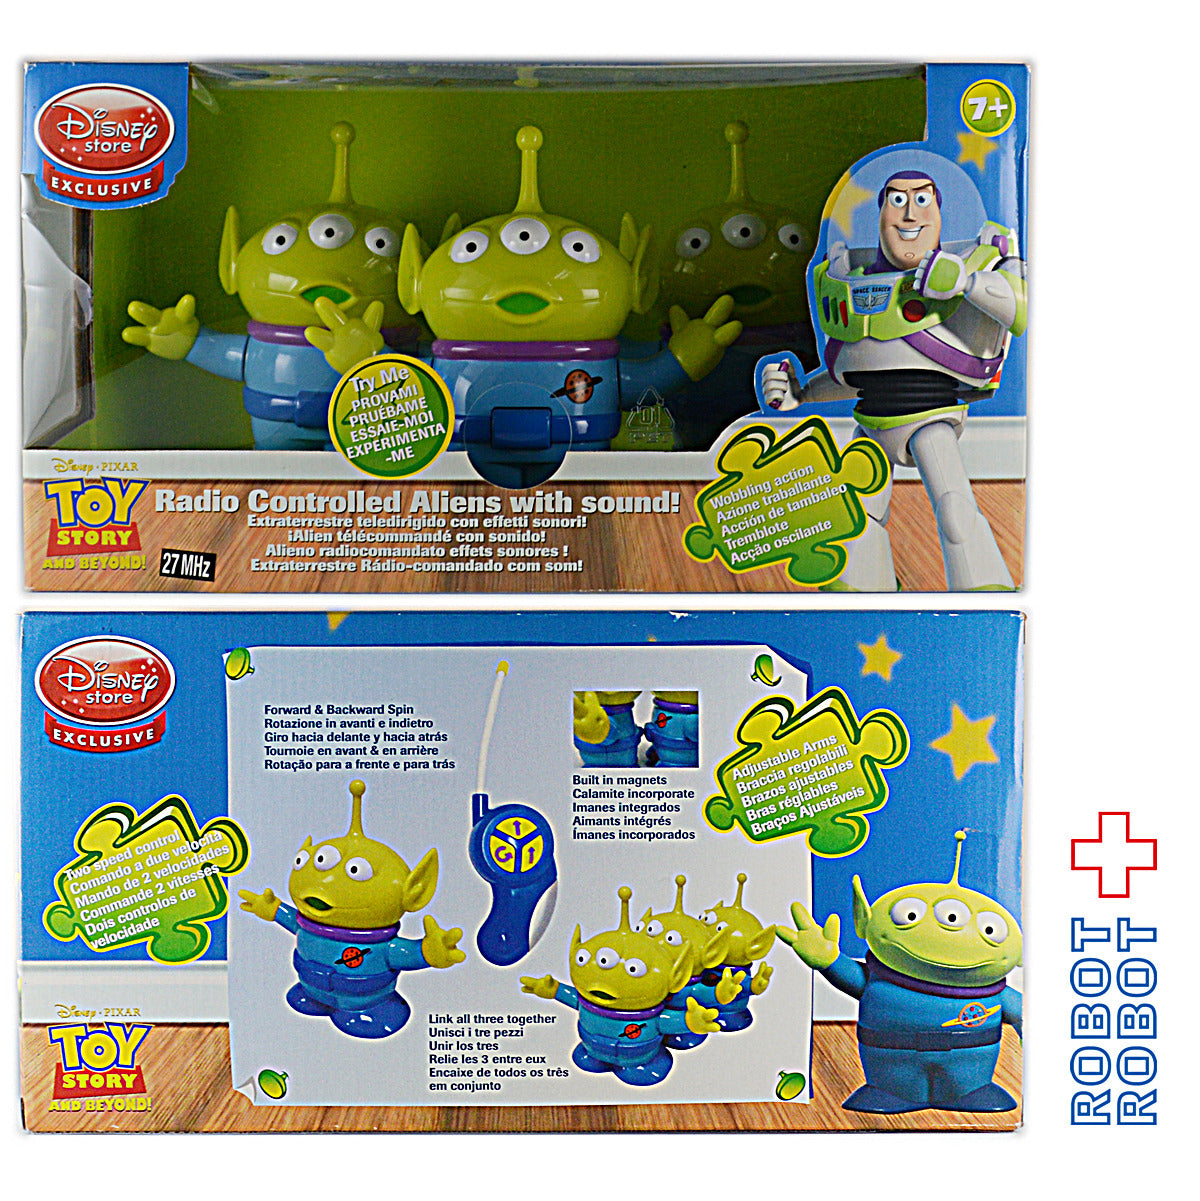 Toy Story Disney Store Radio Controlled Aliens with sound!